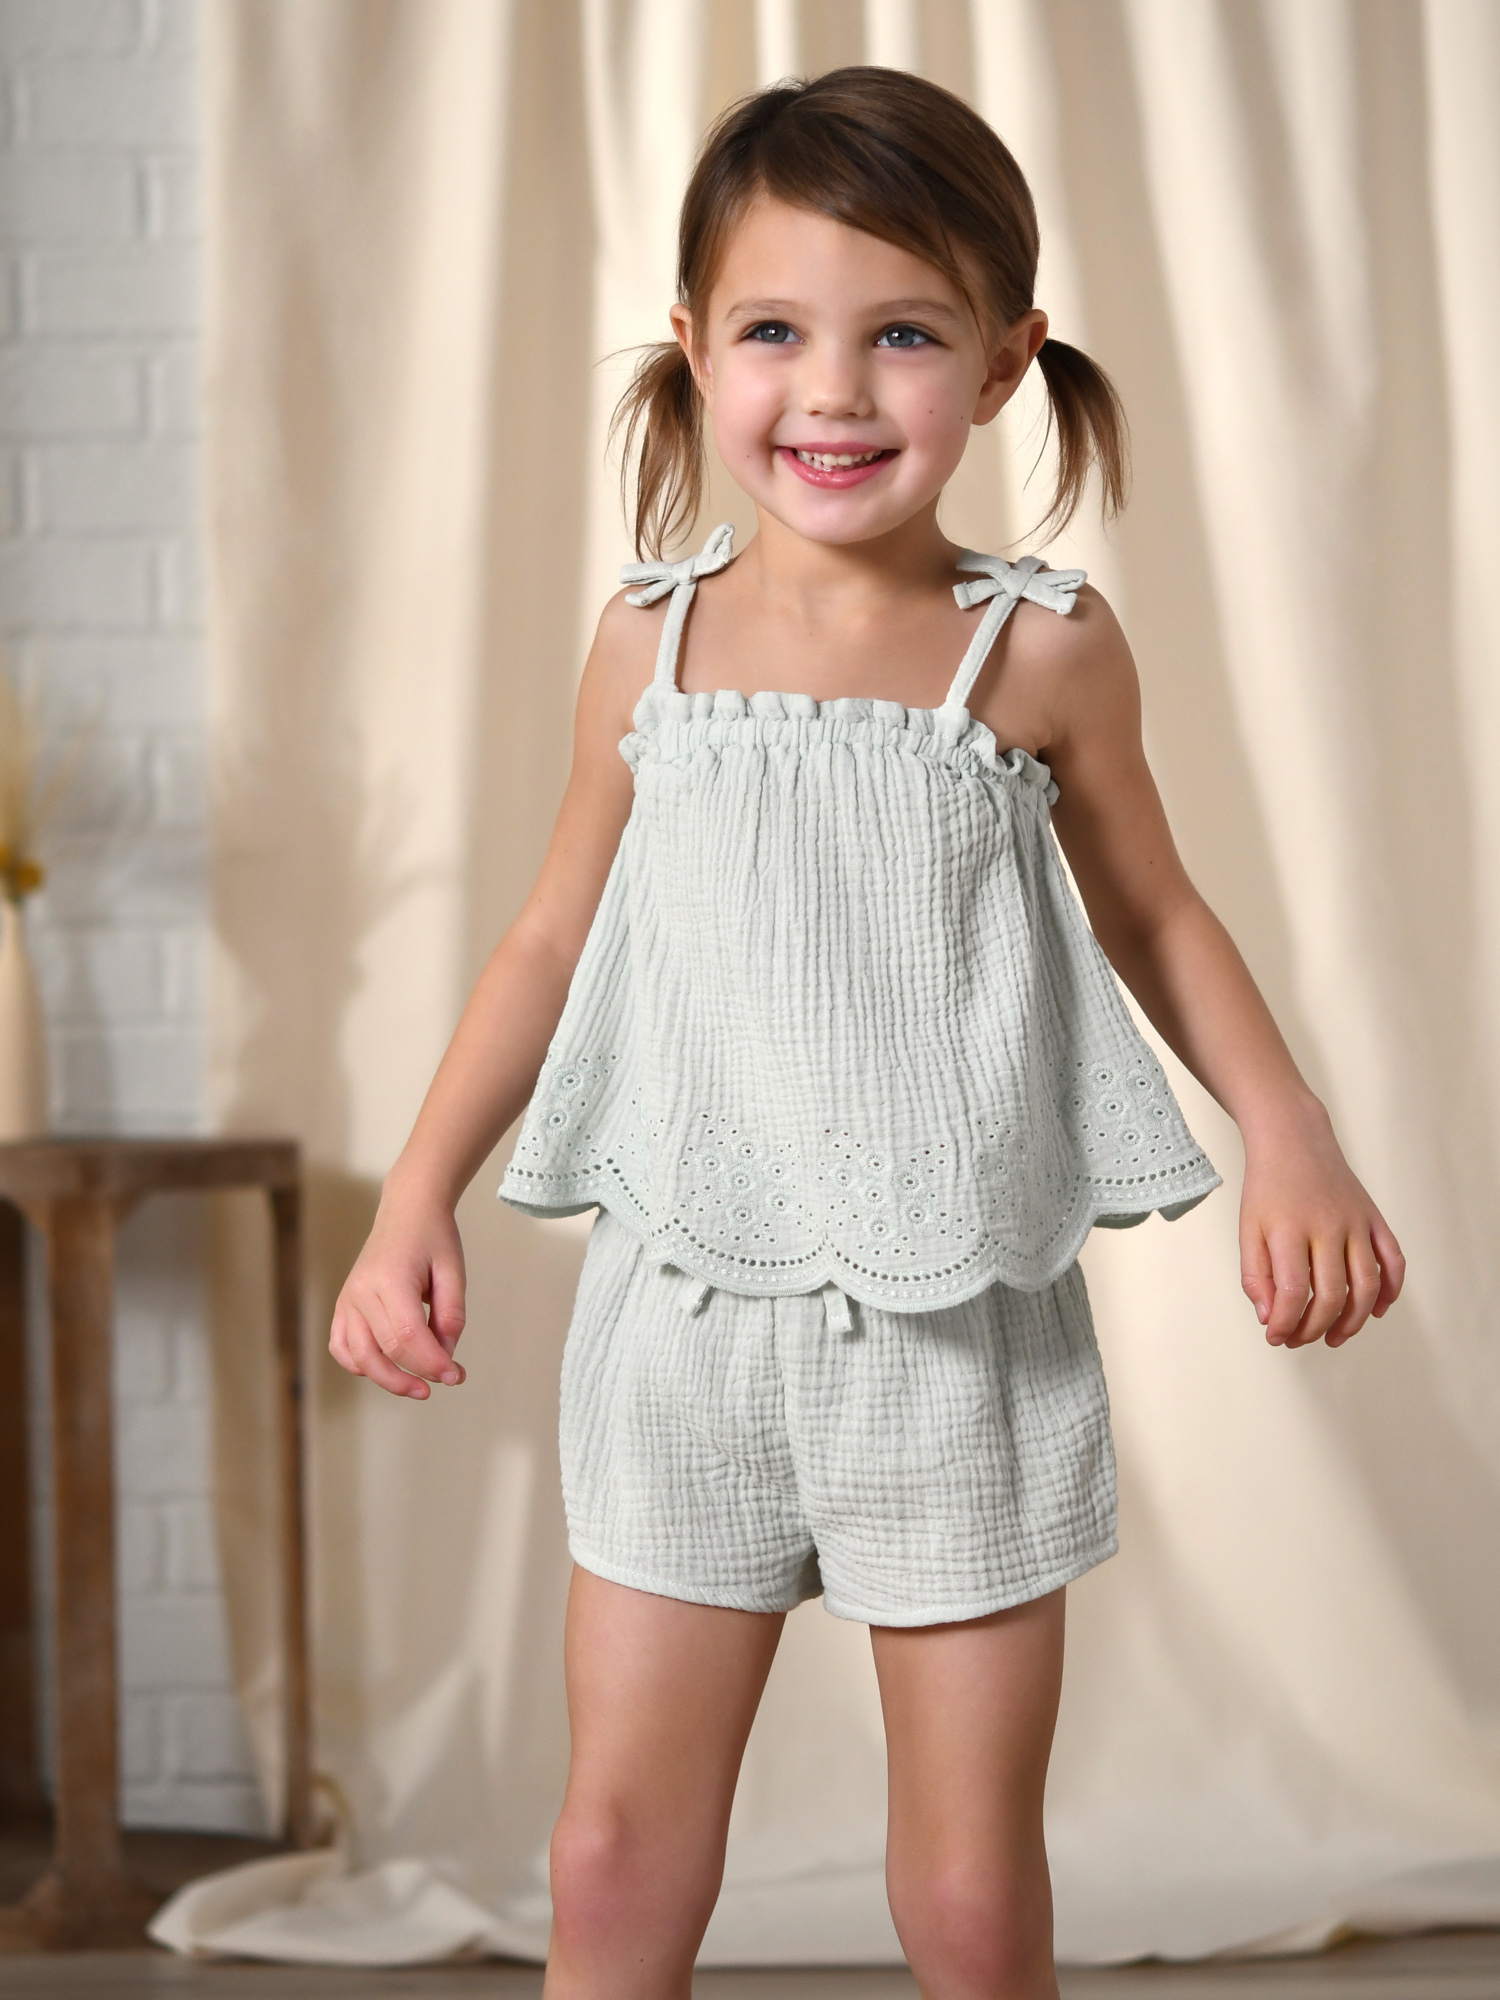 Modern Moments by Gerber Toddler Girl Eyelet Trim Gauze Top and Shorts Set, 2-Piece, Sizes 12M-5T - image 4 of 13